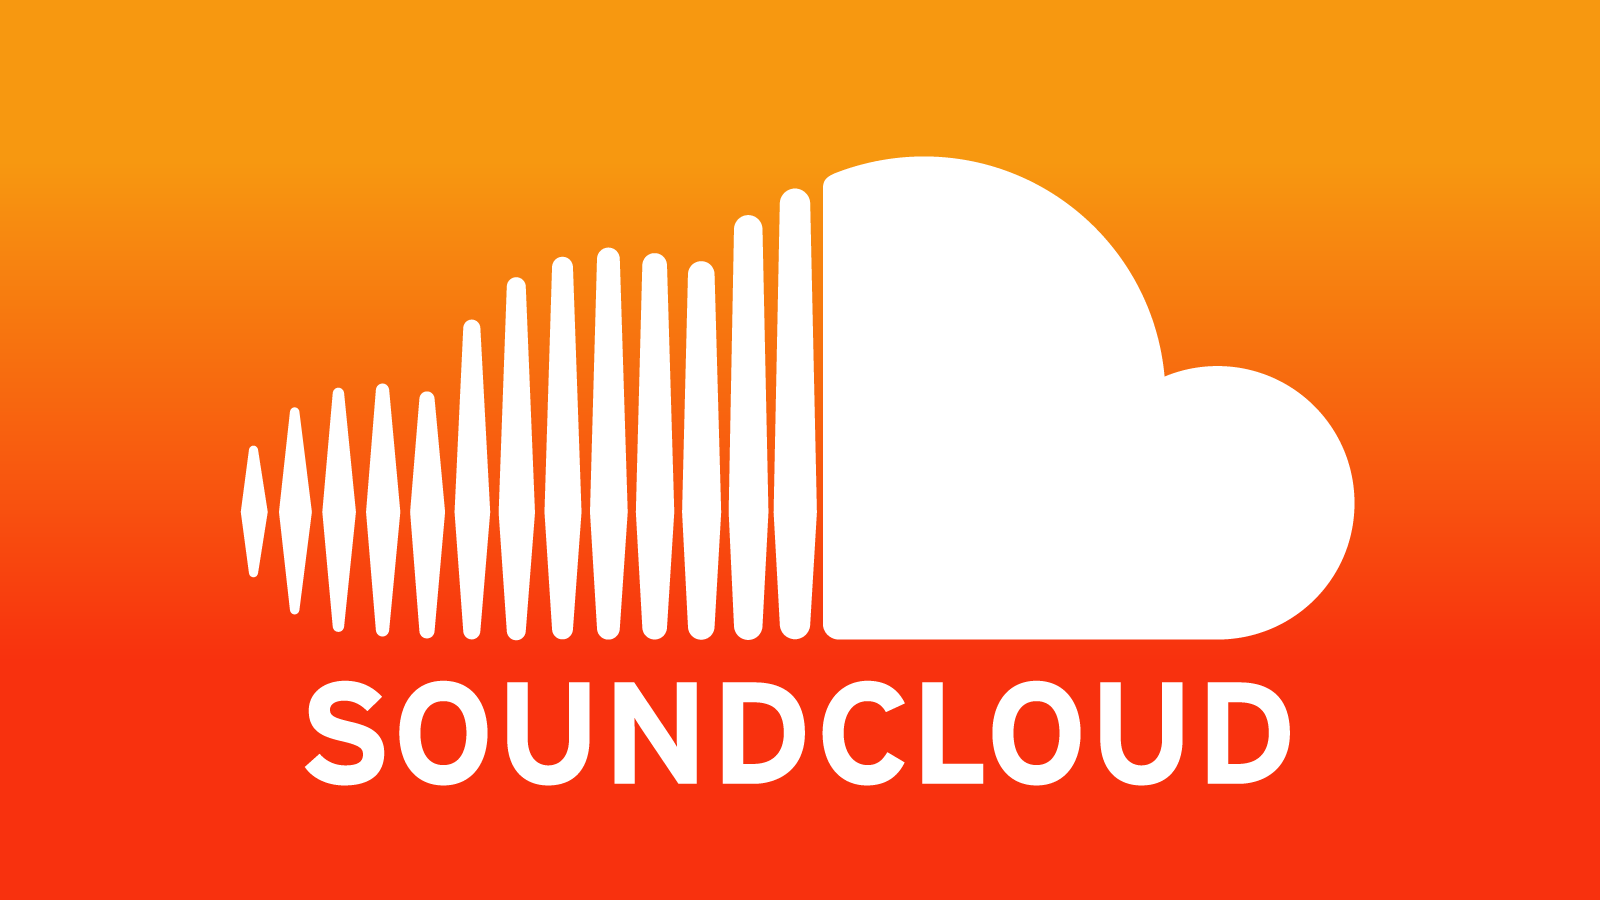 SoundCloud Logo - You Can Now Link to SoundCloud Tracks in Your Instagram Stories ...